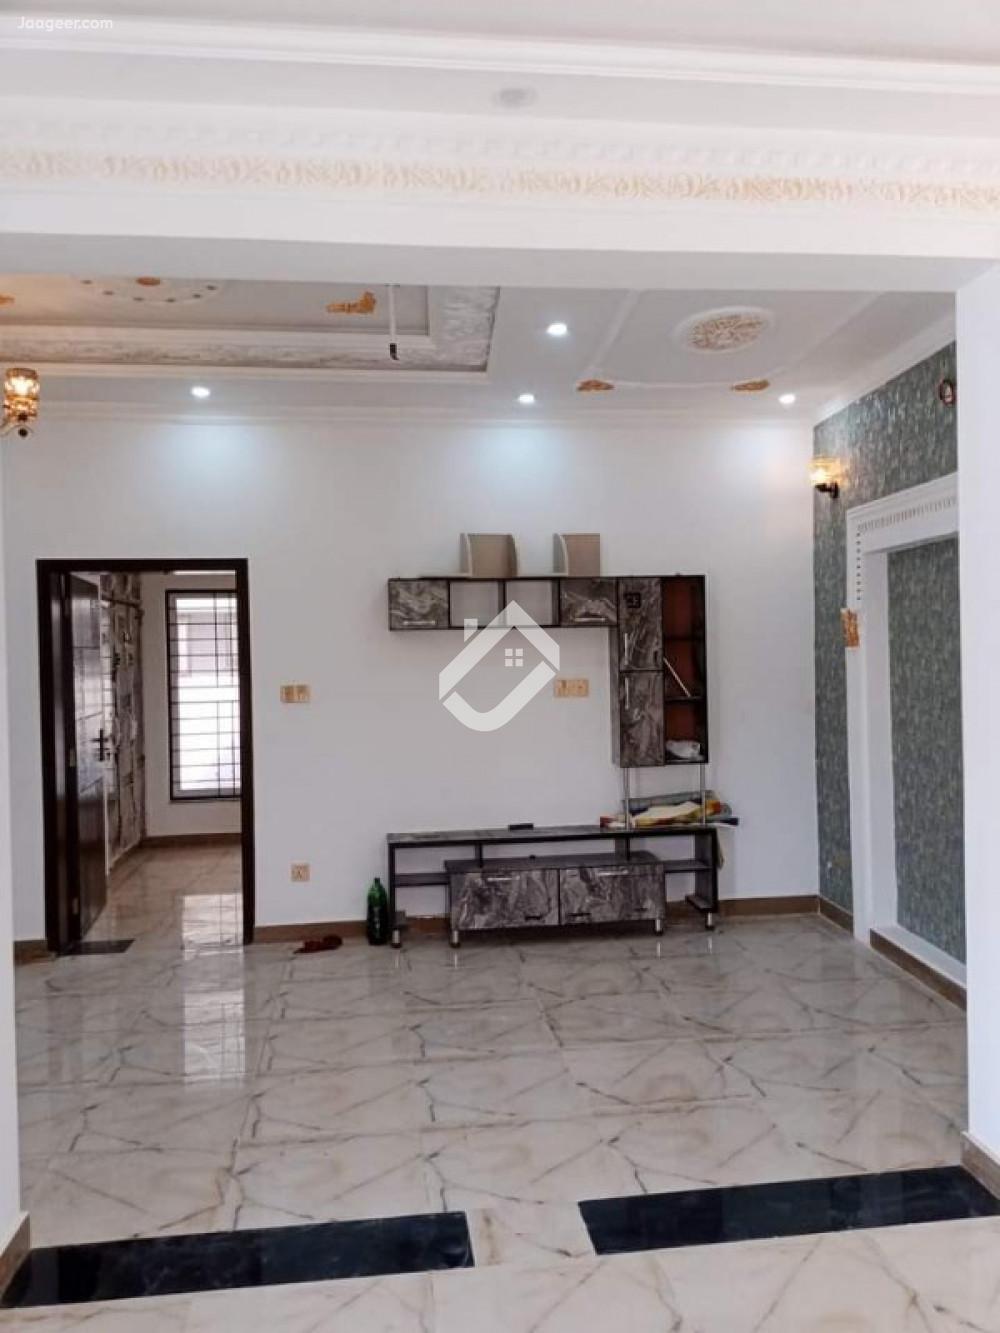 Main image 5 Marla Double Storey House For Sale In Central Park Main Ferozpur Road  Central Park, Lahore